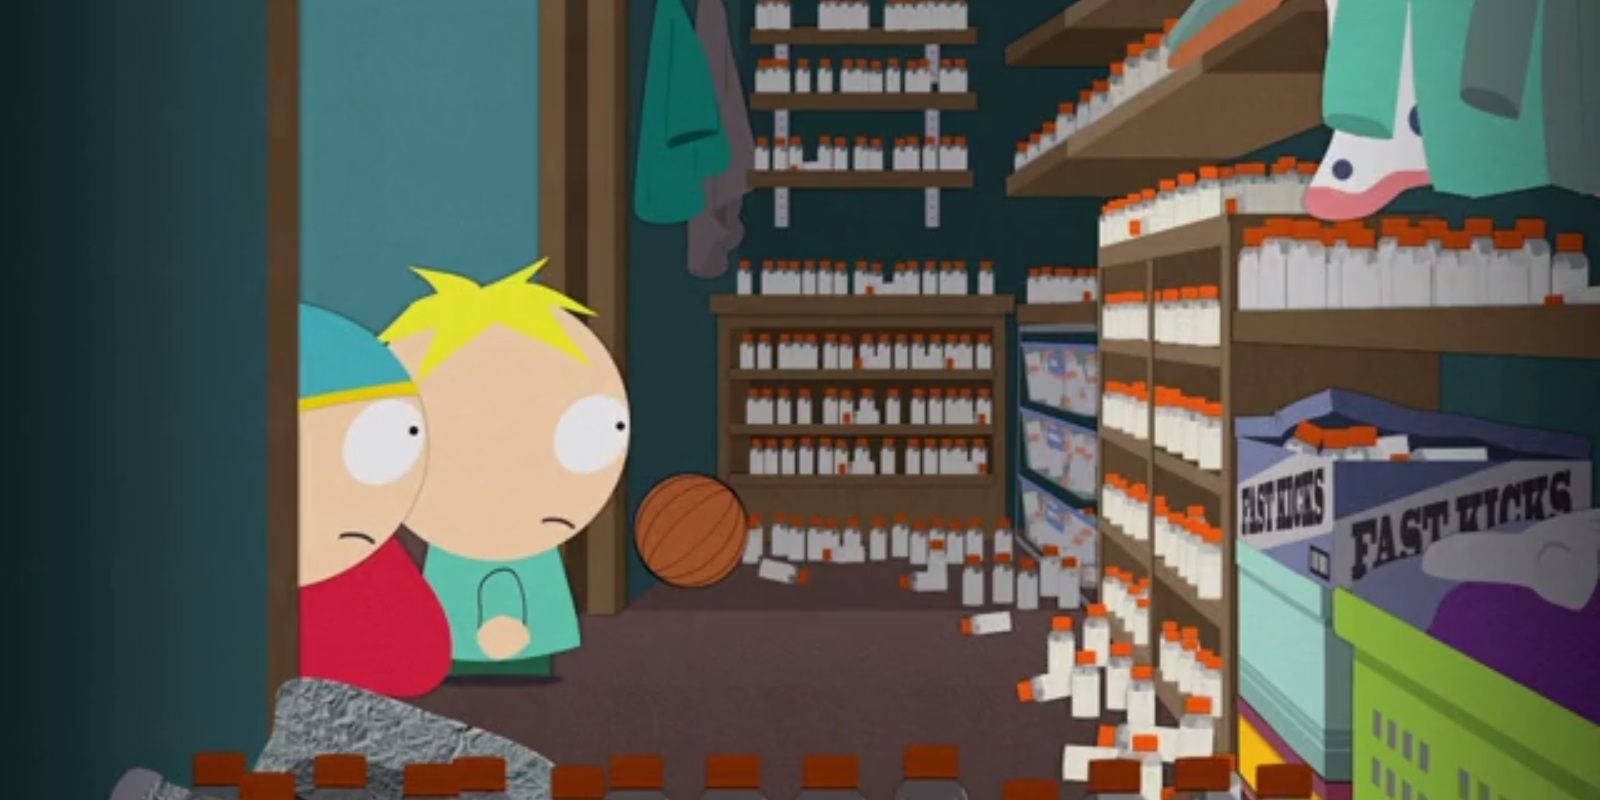 Butters and Cartman in a closet